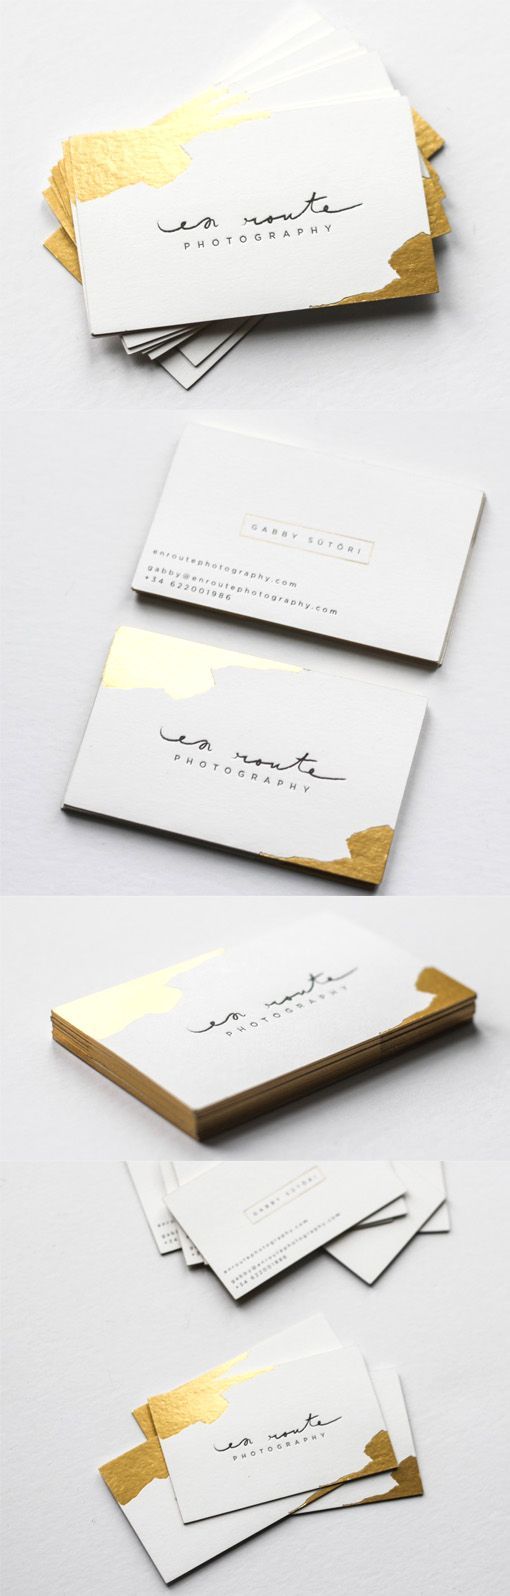 Bored with your ordinary business card? Try a luxury one!